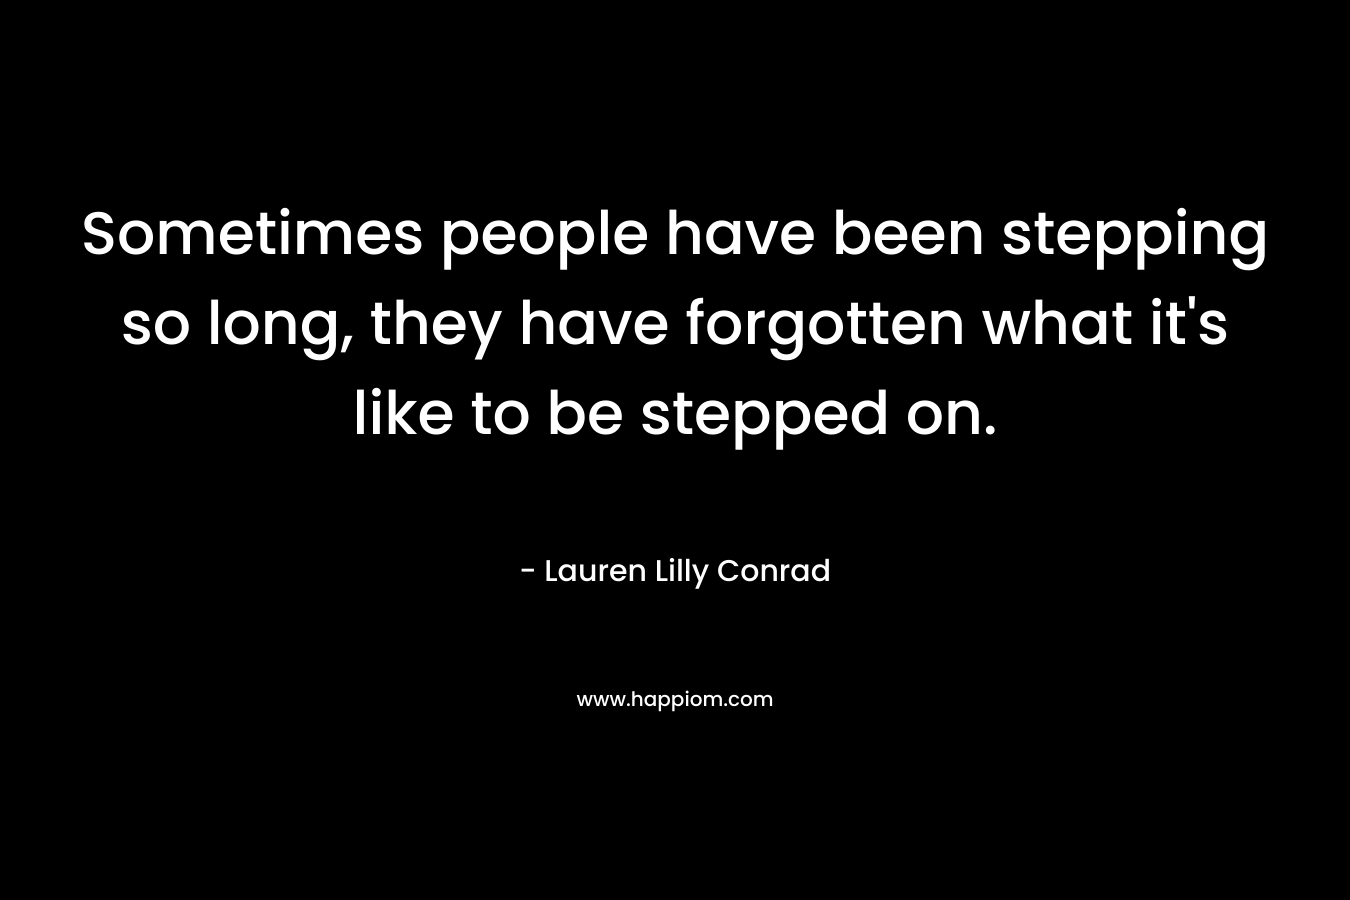 Sometimes people have been stepping so long, they have forgotten what it's like to be stepped on.